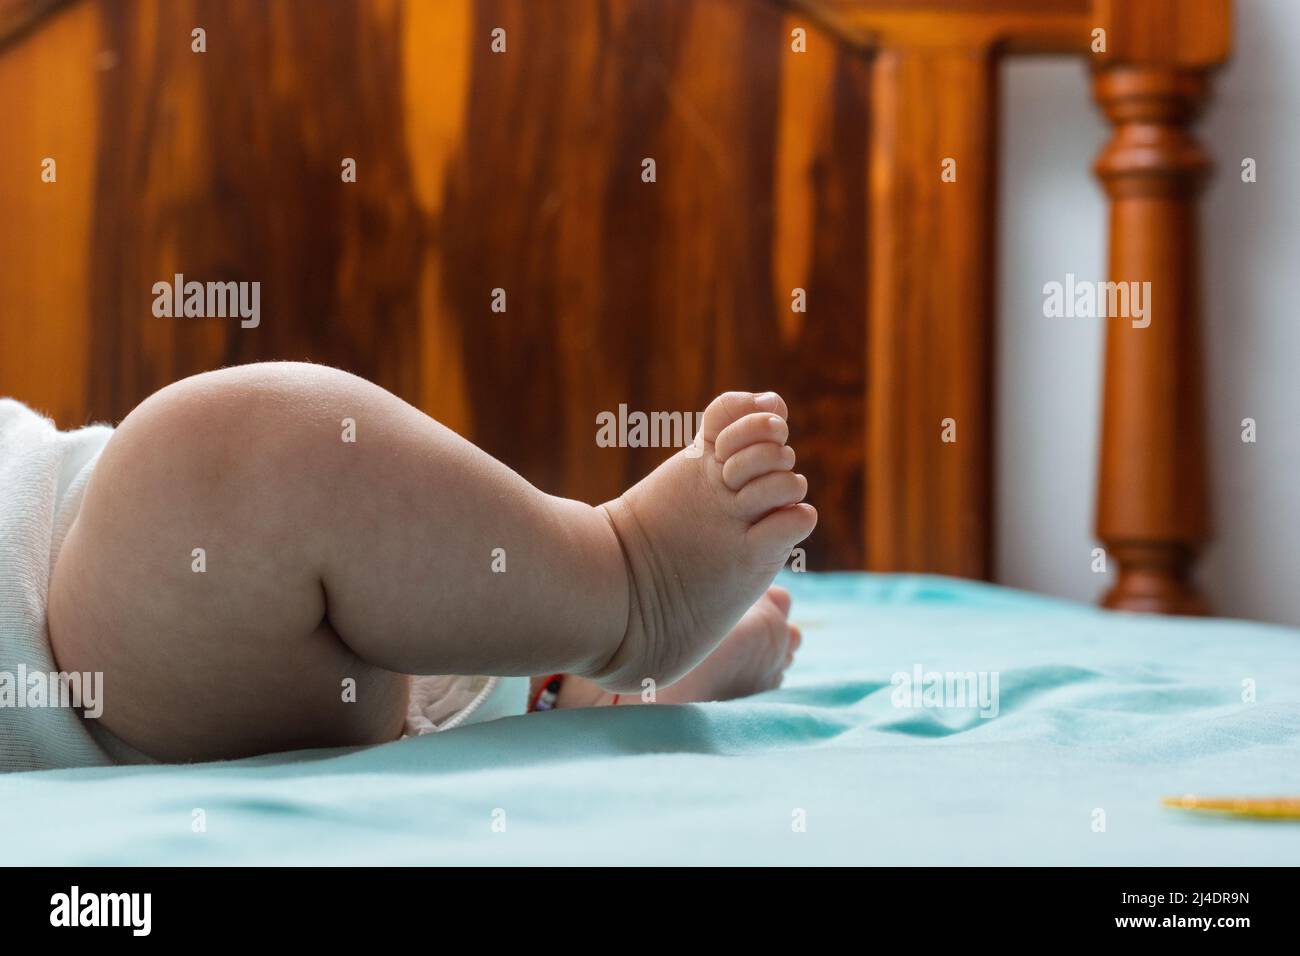 close-up detail of the feet of a latina baby girl lying on a bed with blue sheets. feet of a chubby baby girl, with kicking motion and shrunken toes. Stock Photo